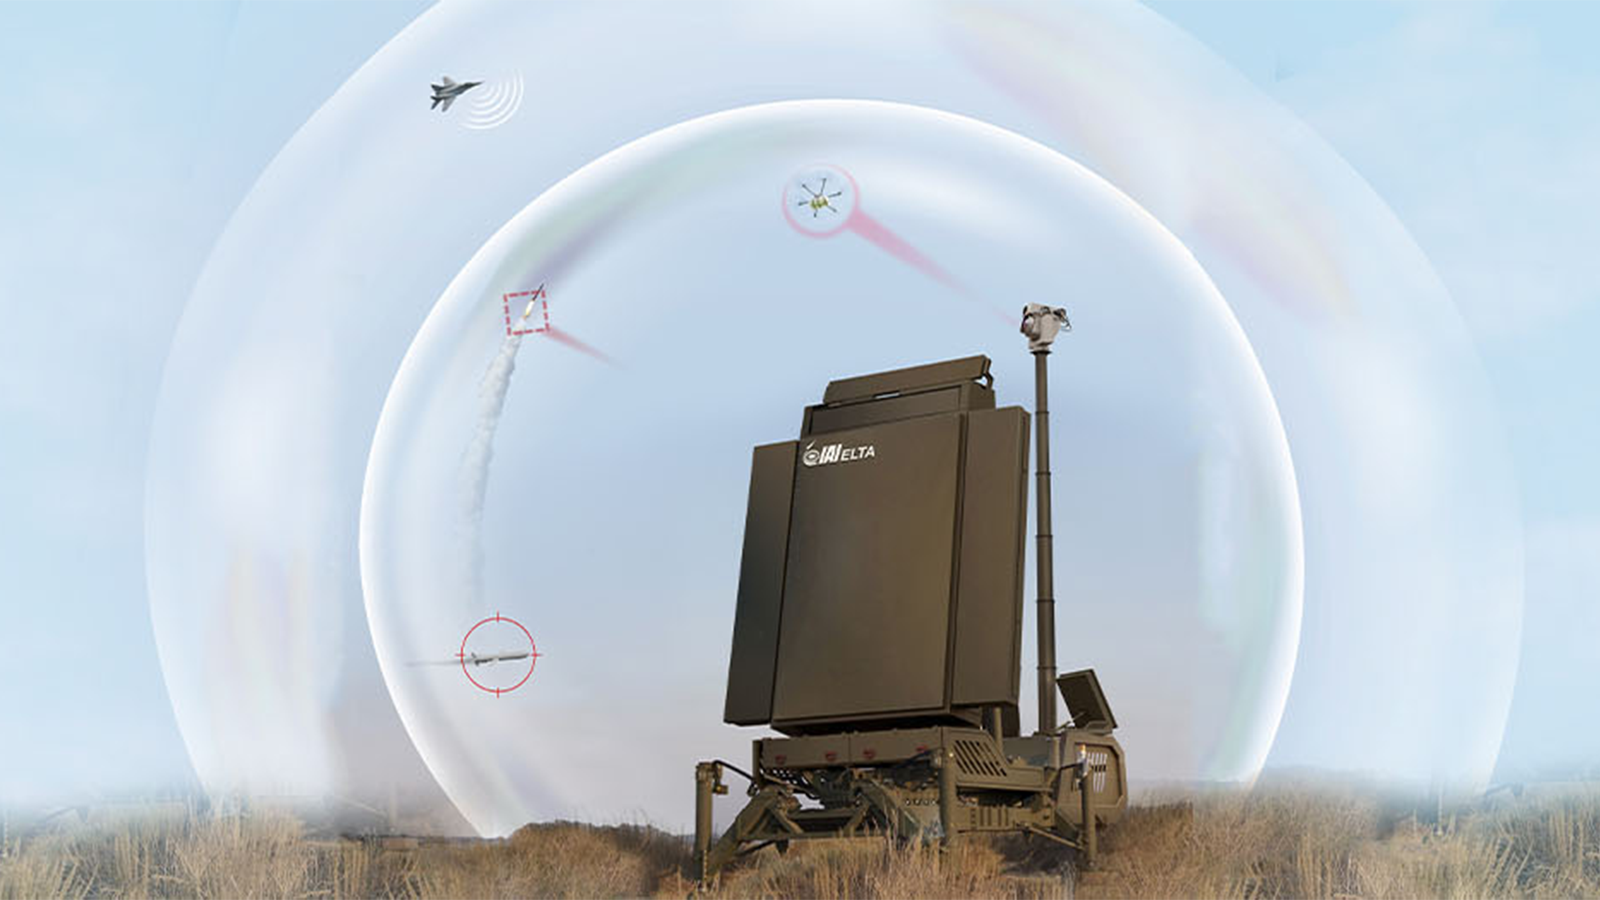 Interview: With radars and UAVs, Israel’s IAI diving ‘full force’ into US market